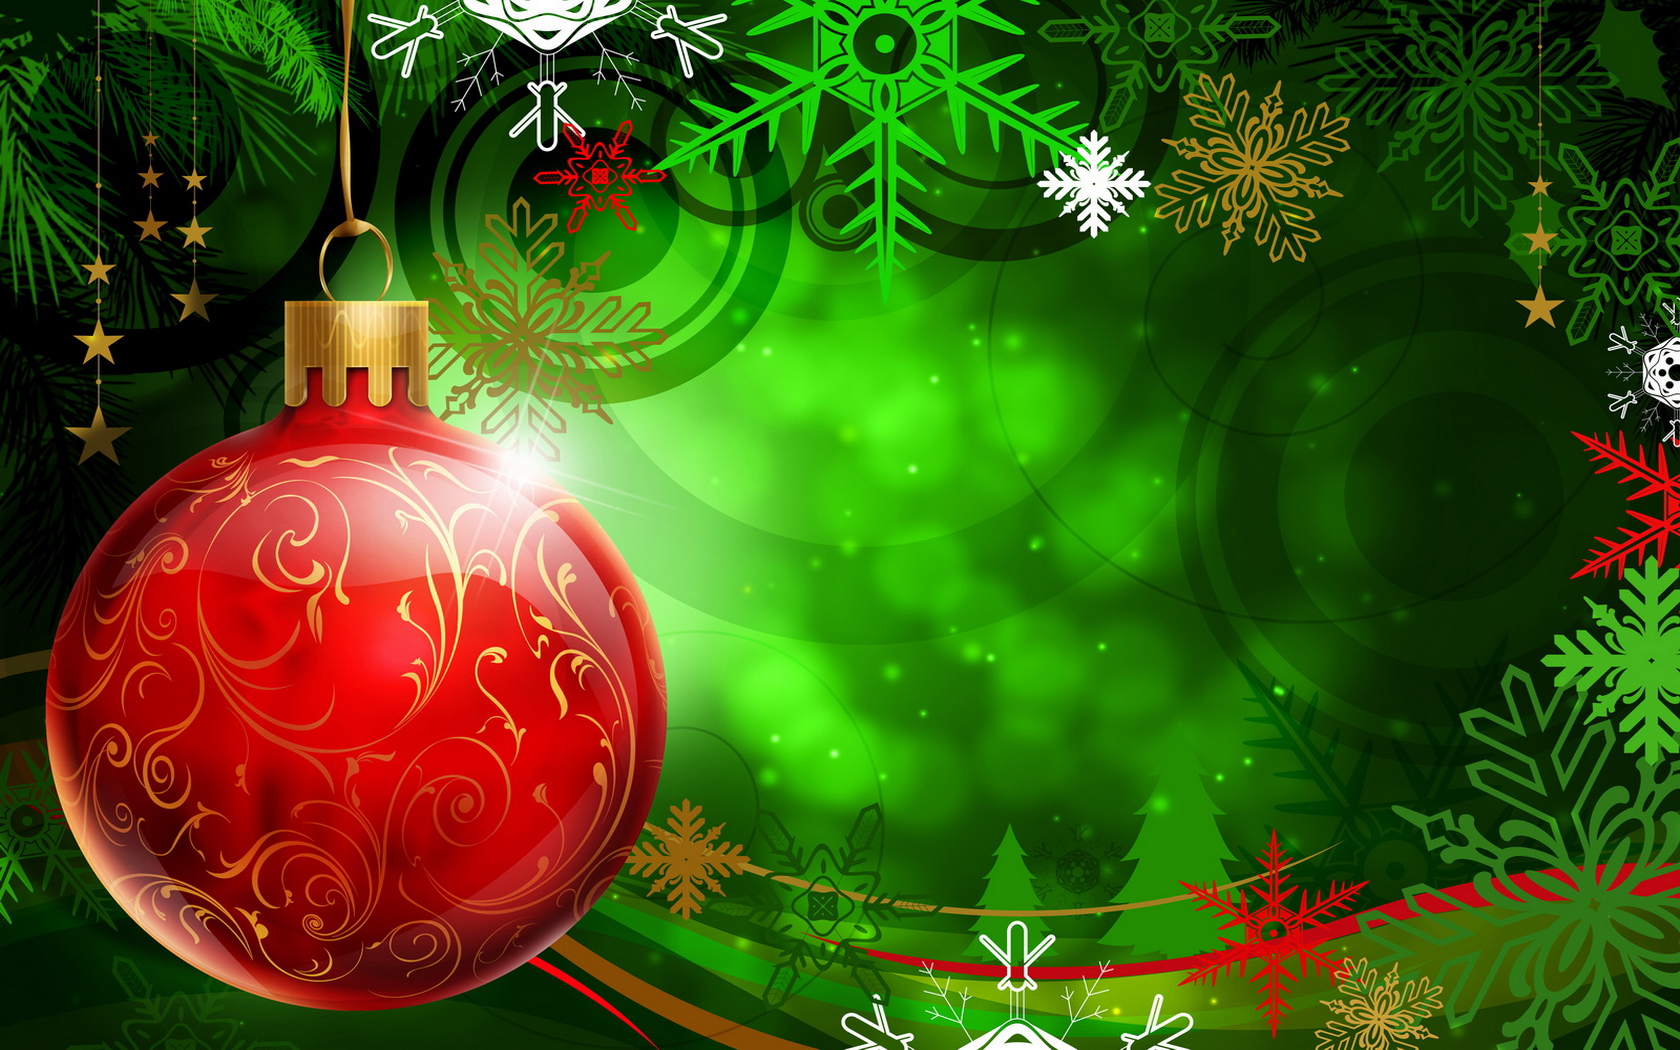 Live Christmas Wallpaper Android